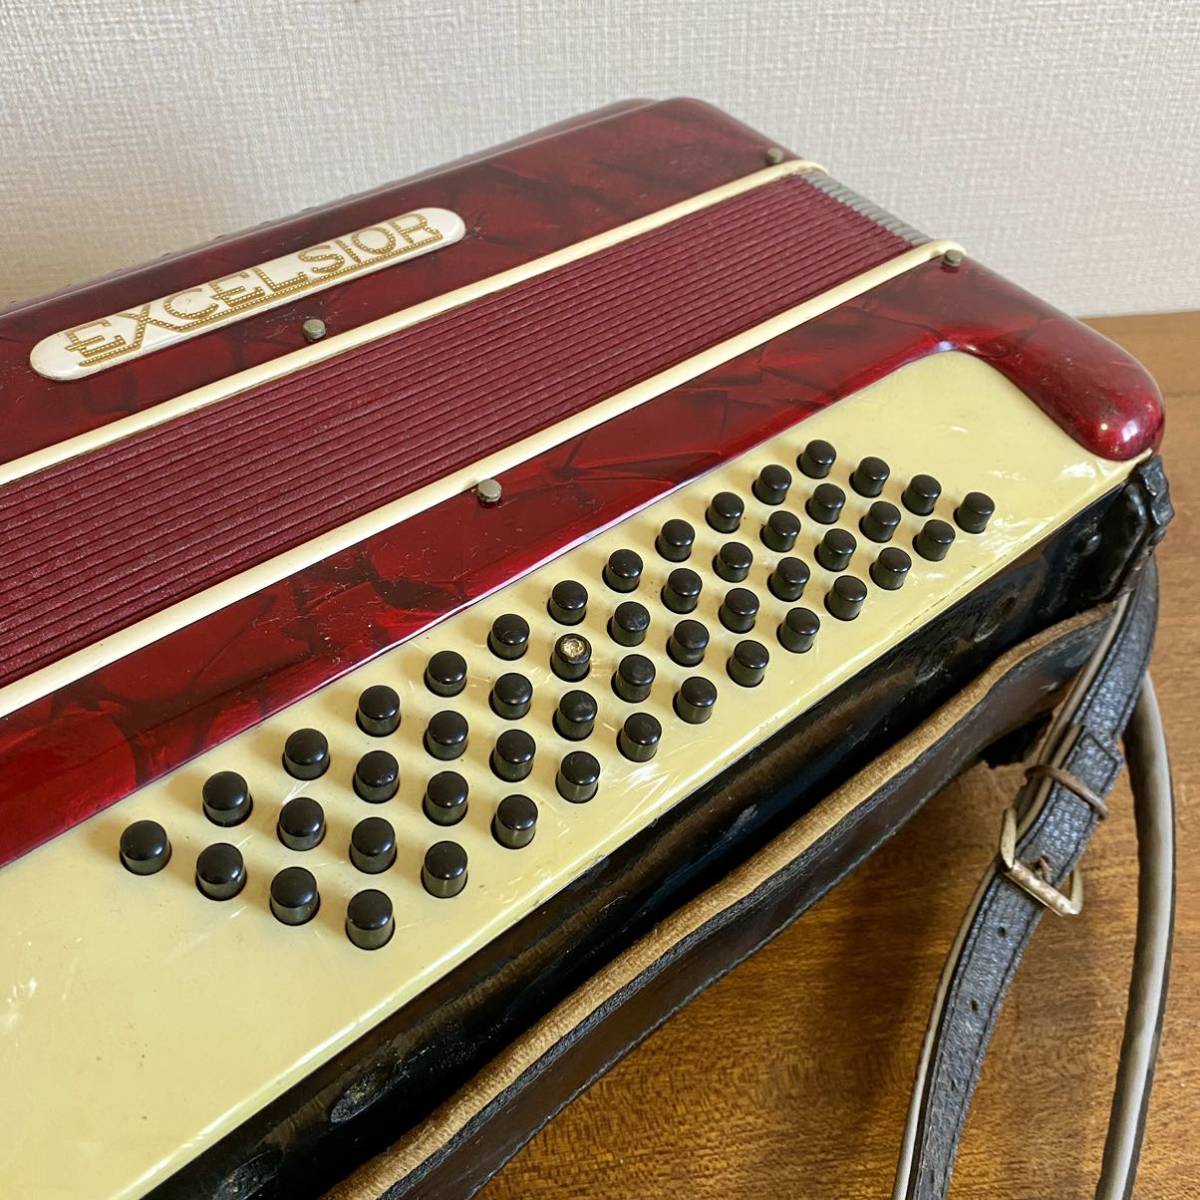  Vintage EXCEL SIOR accordion model 302 / Excel car - Italy made red keyboard instruments [ junk ][ present condition goods ]